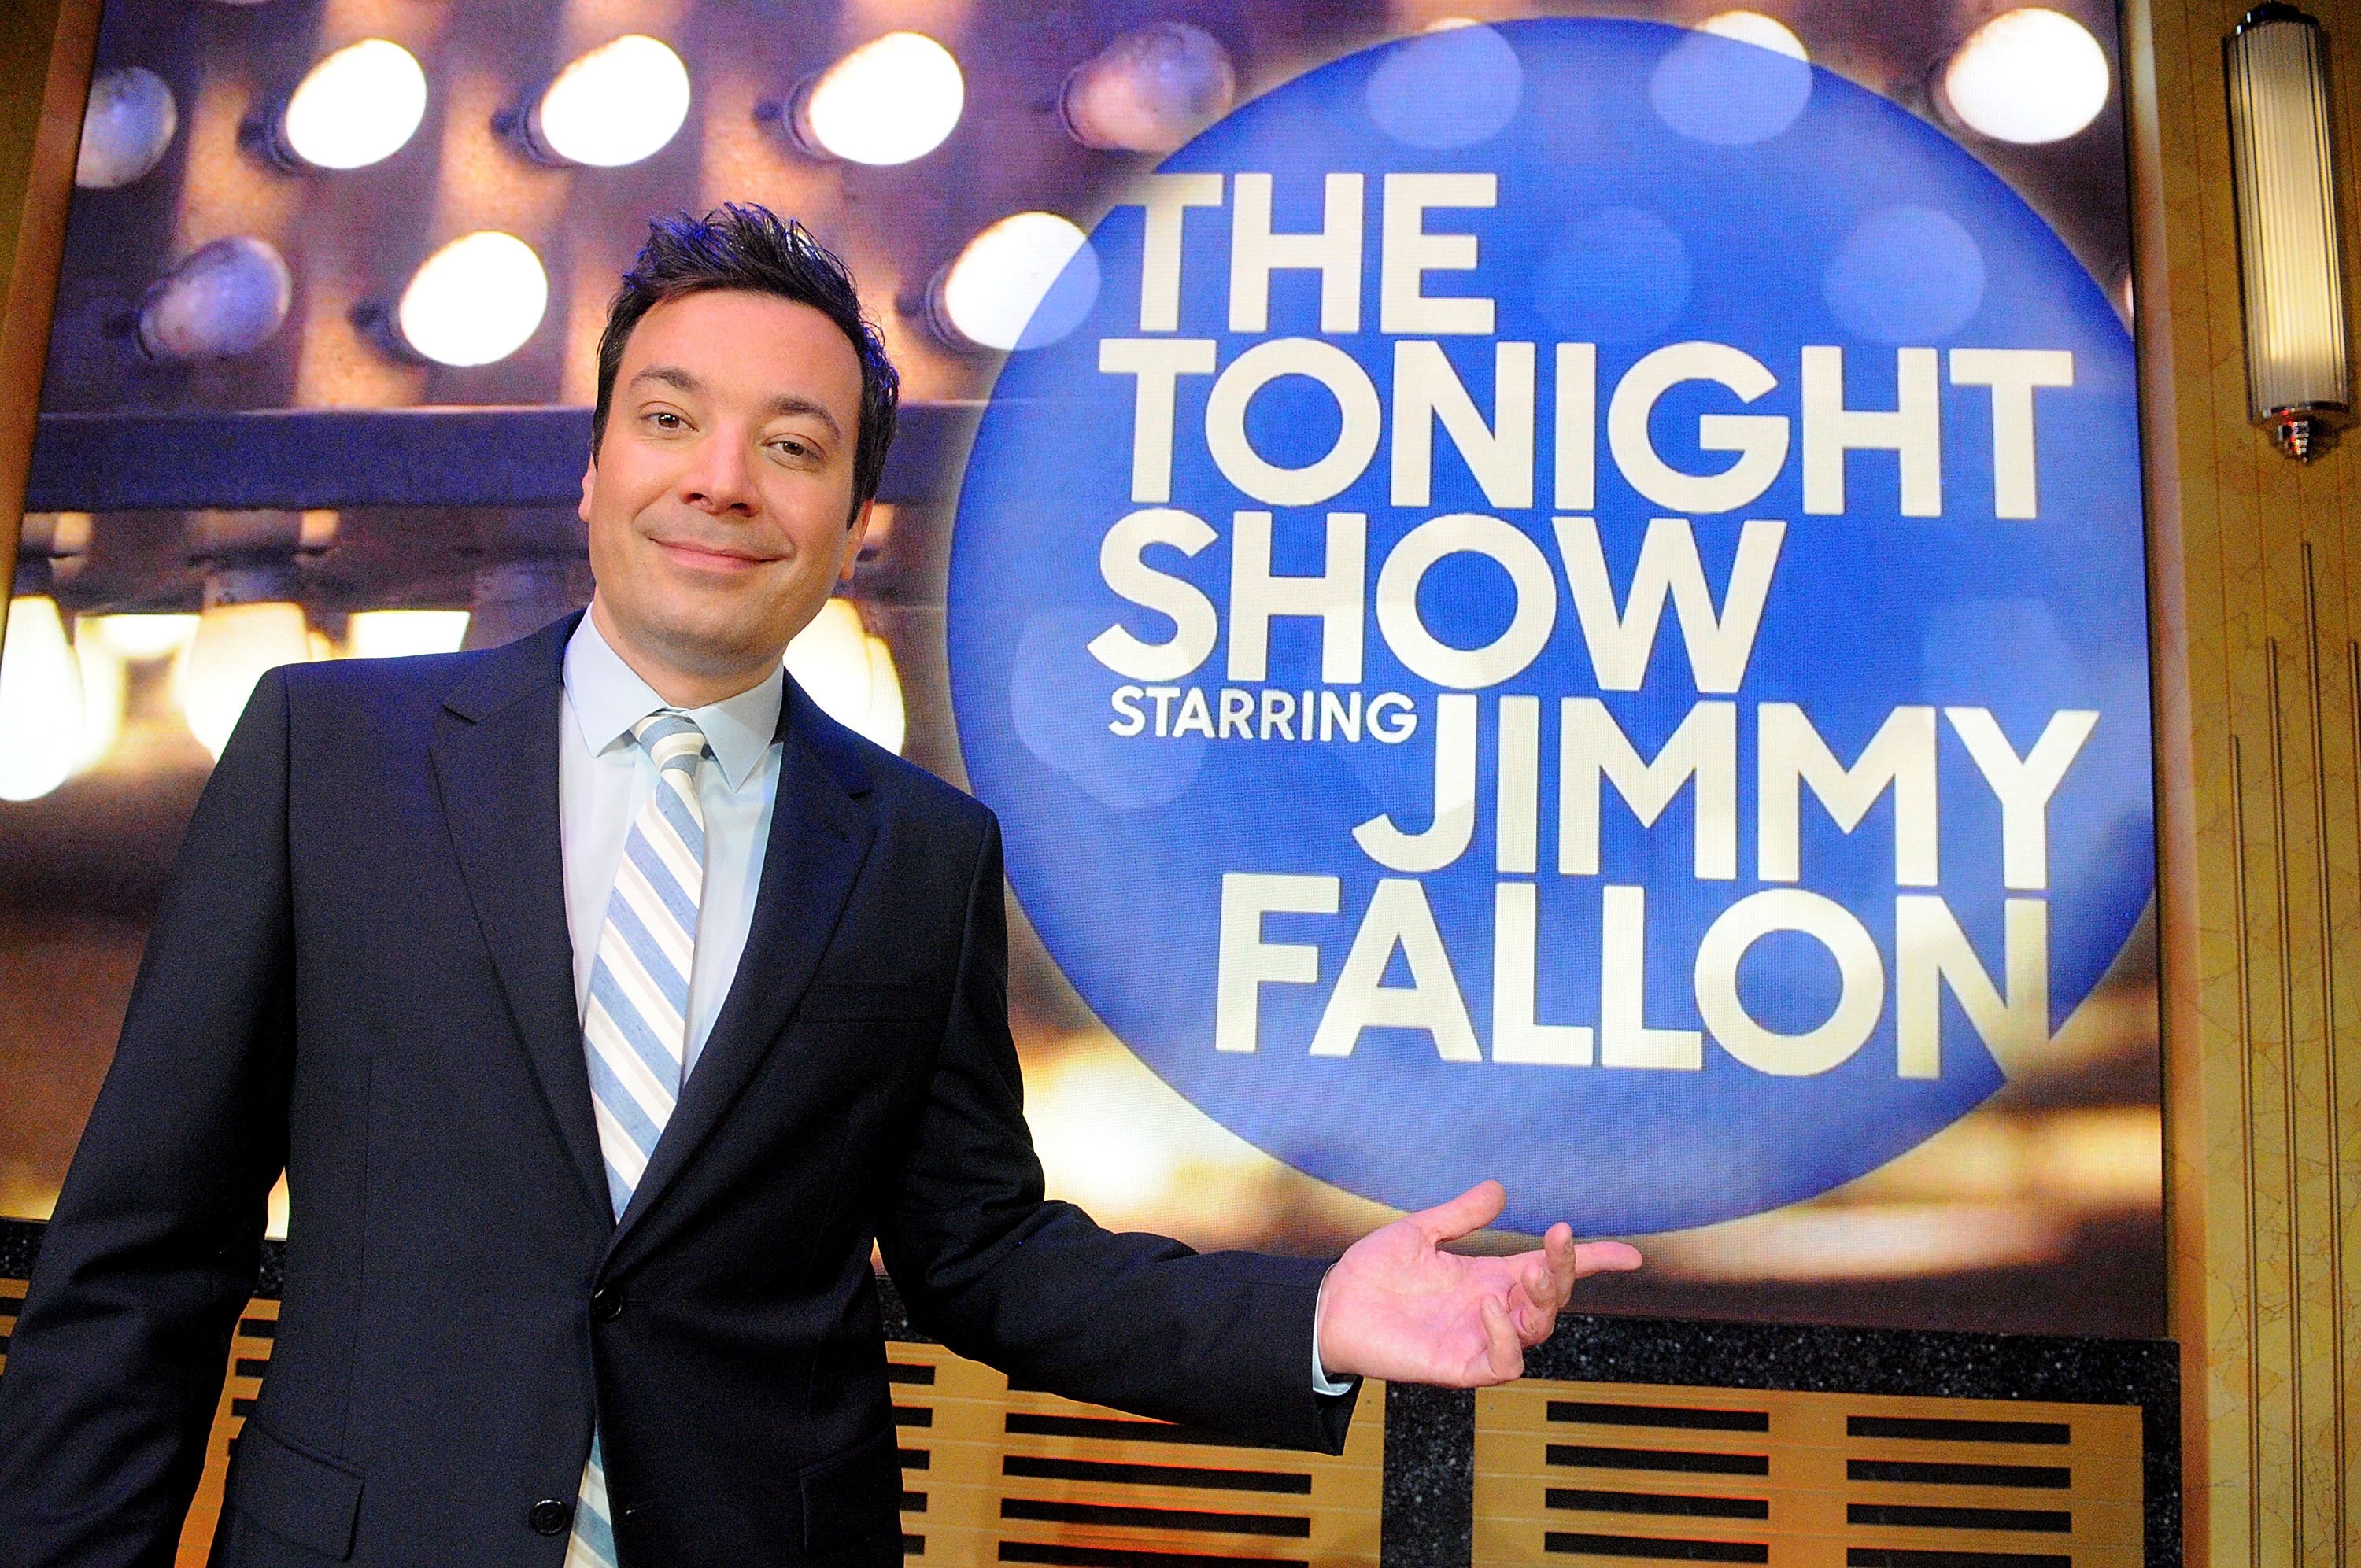 Jimmy Fallon poses during a presentation for the media on April 3, 2017, in Orlando, Florida. | Source: Getty Images.